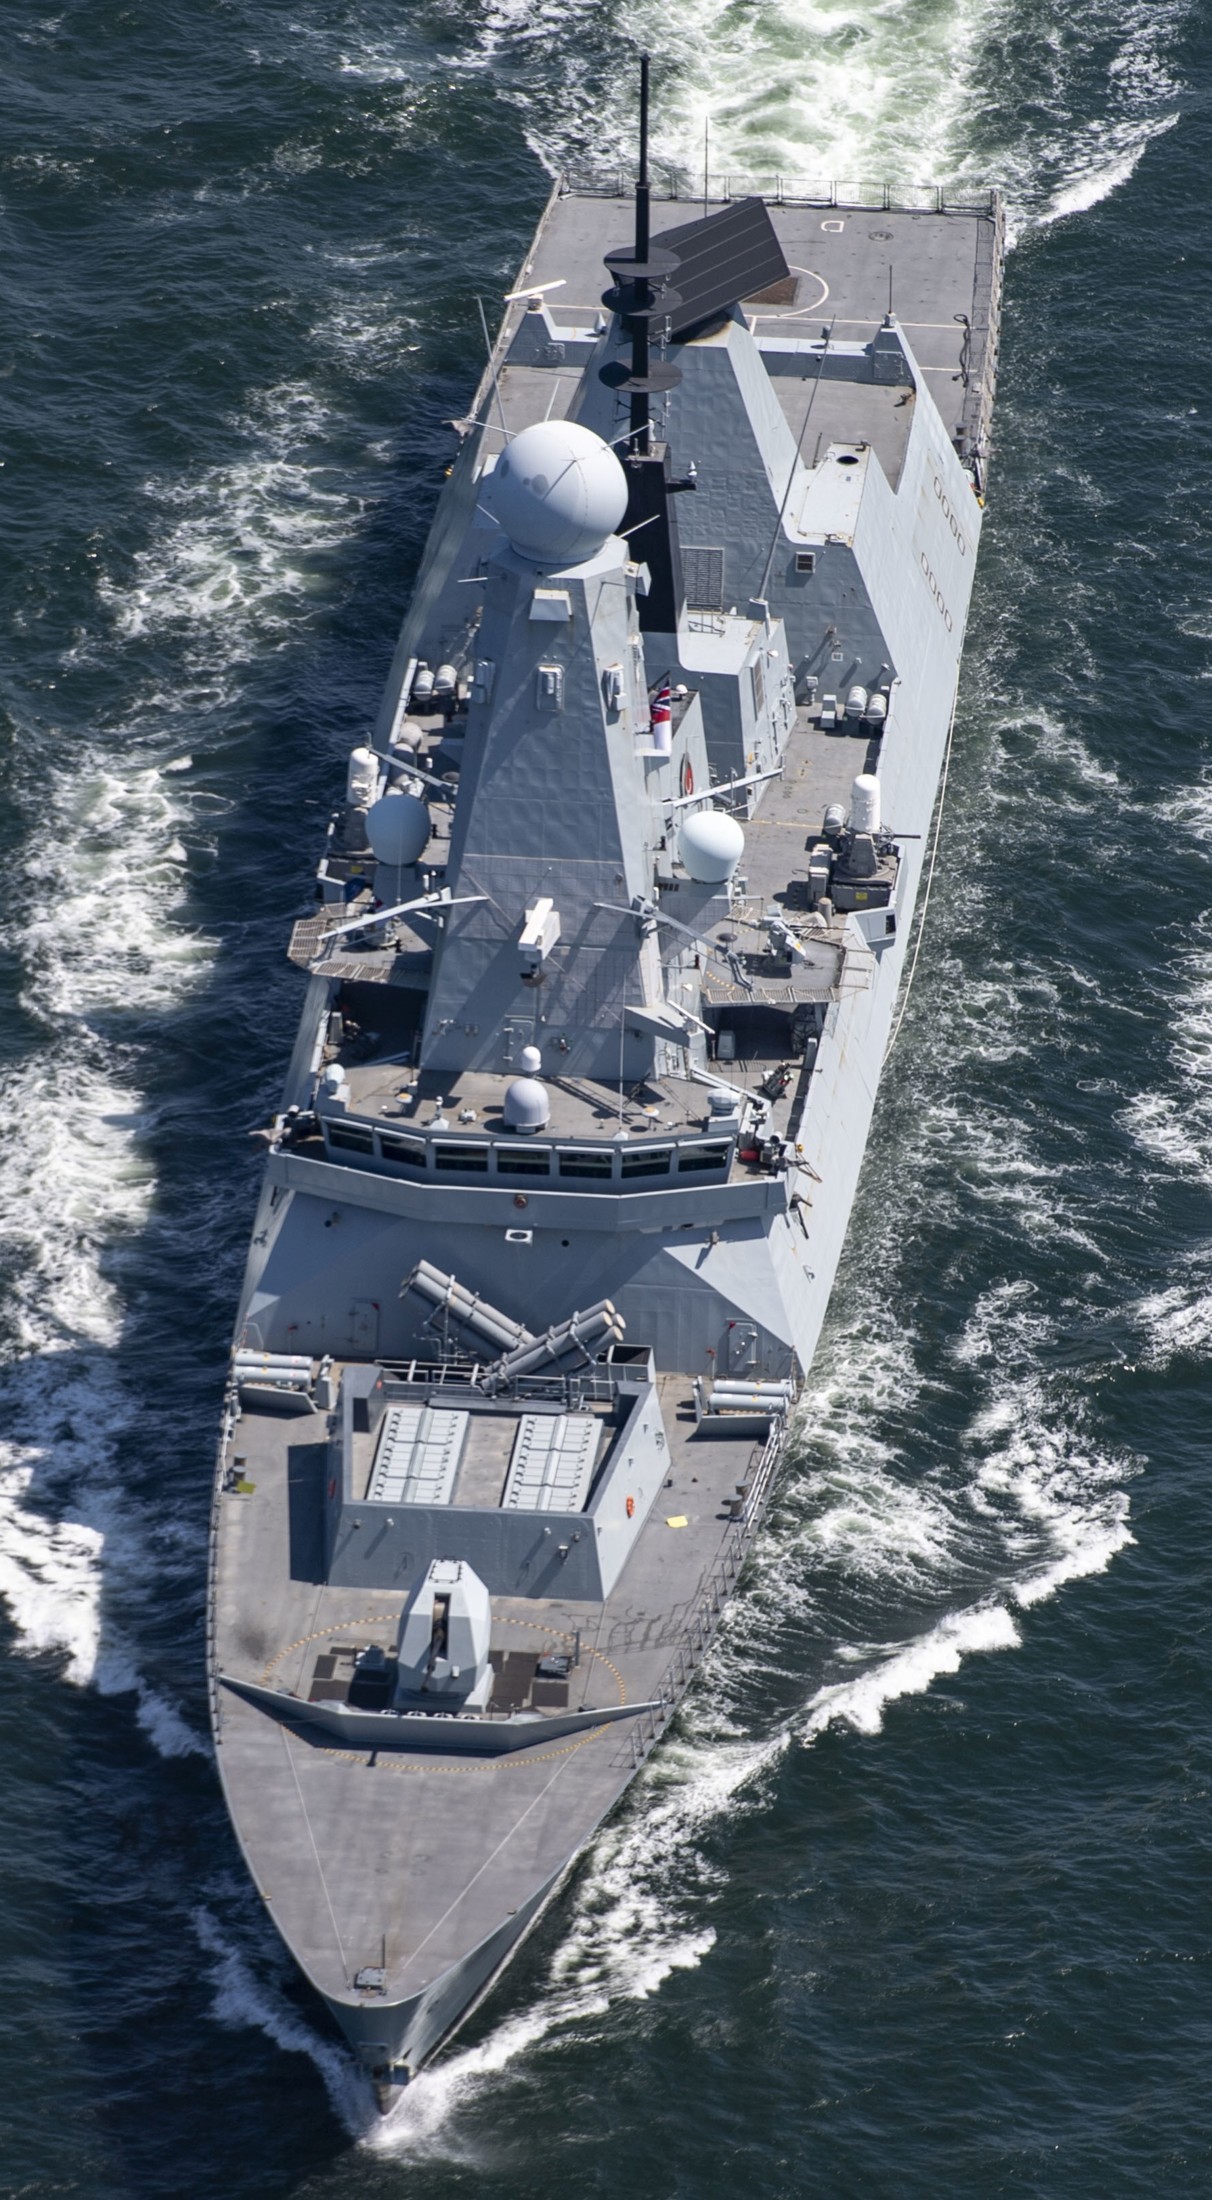 d37 hms duncan d-37 type 45 daring class guided missile destroyer ddg royal navy sea viper 21